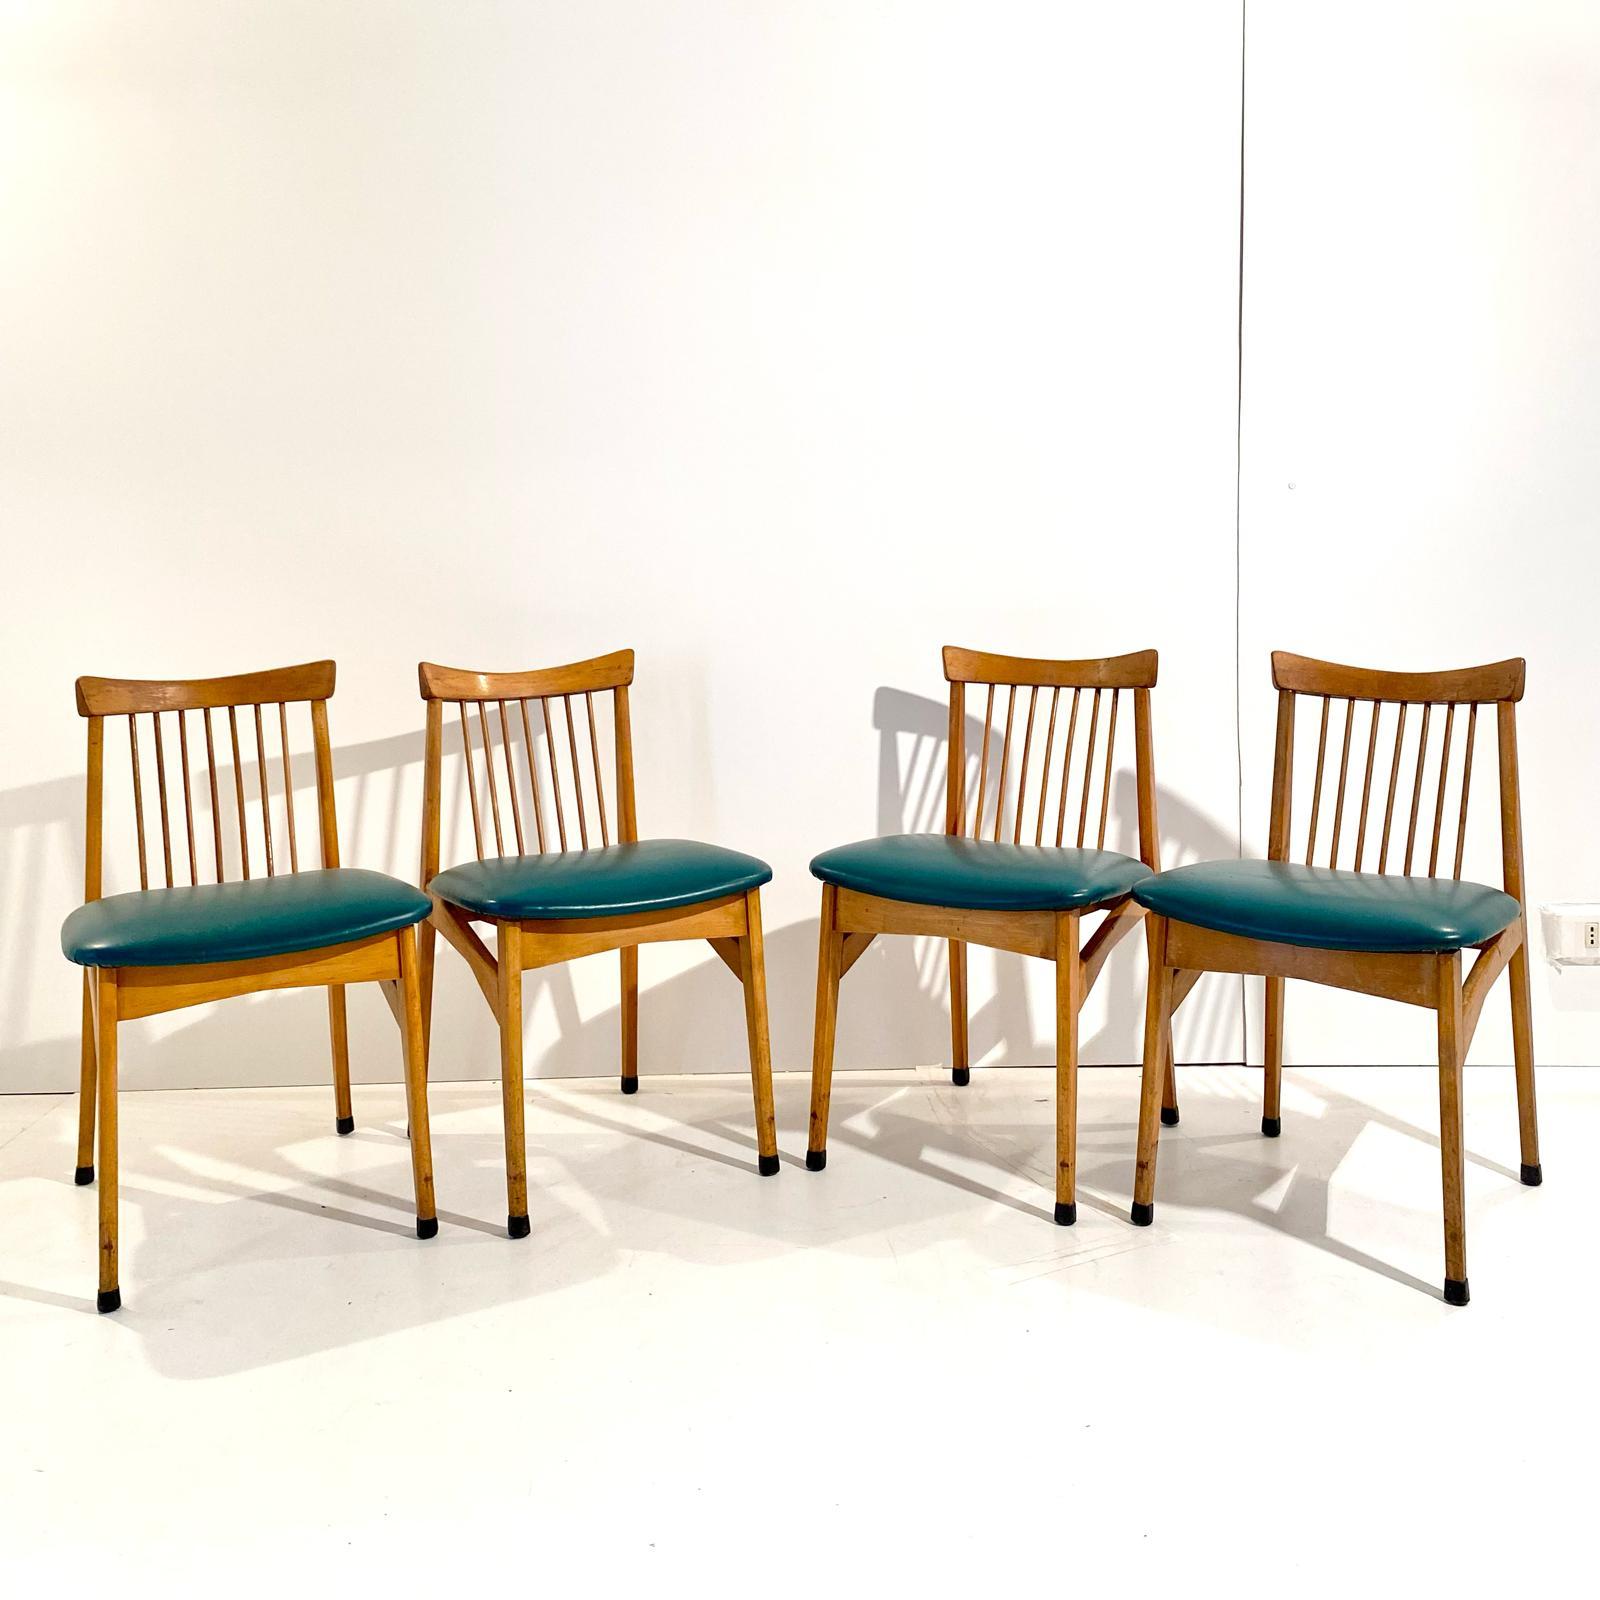 Midcentury modern wood dining chairs, Set of Four, Italy, 1960s In Good Condition For Sale In Ceglie Messapica, IT